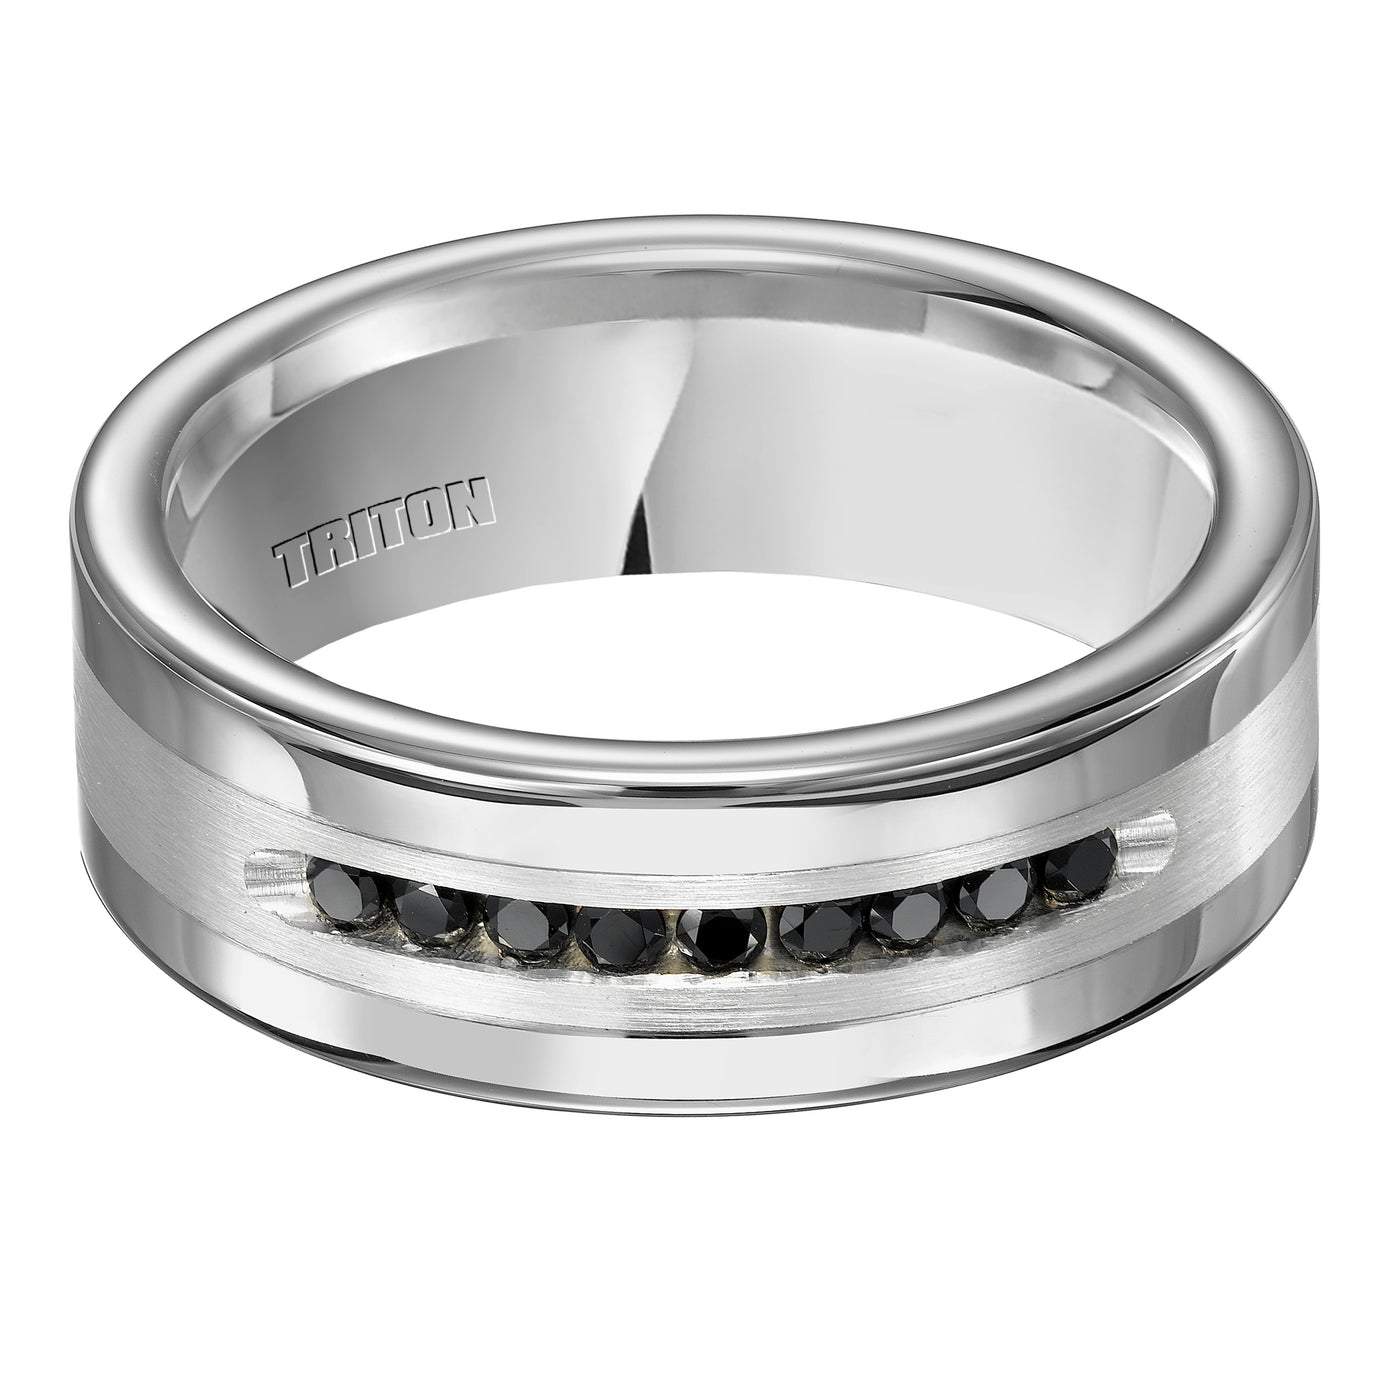 8MM Bright Polished Tungsten Carbide Comfort Fit band with Brush Finish Silver Inlay and 1/4 carat of Channel Set Black Diamonds.